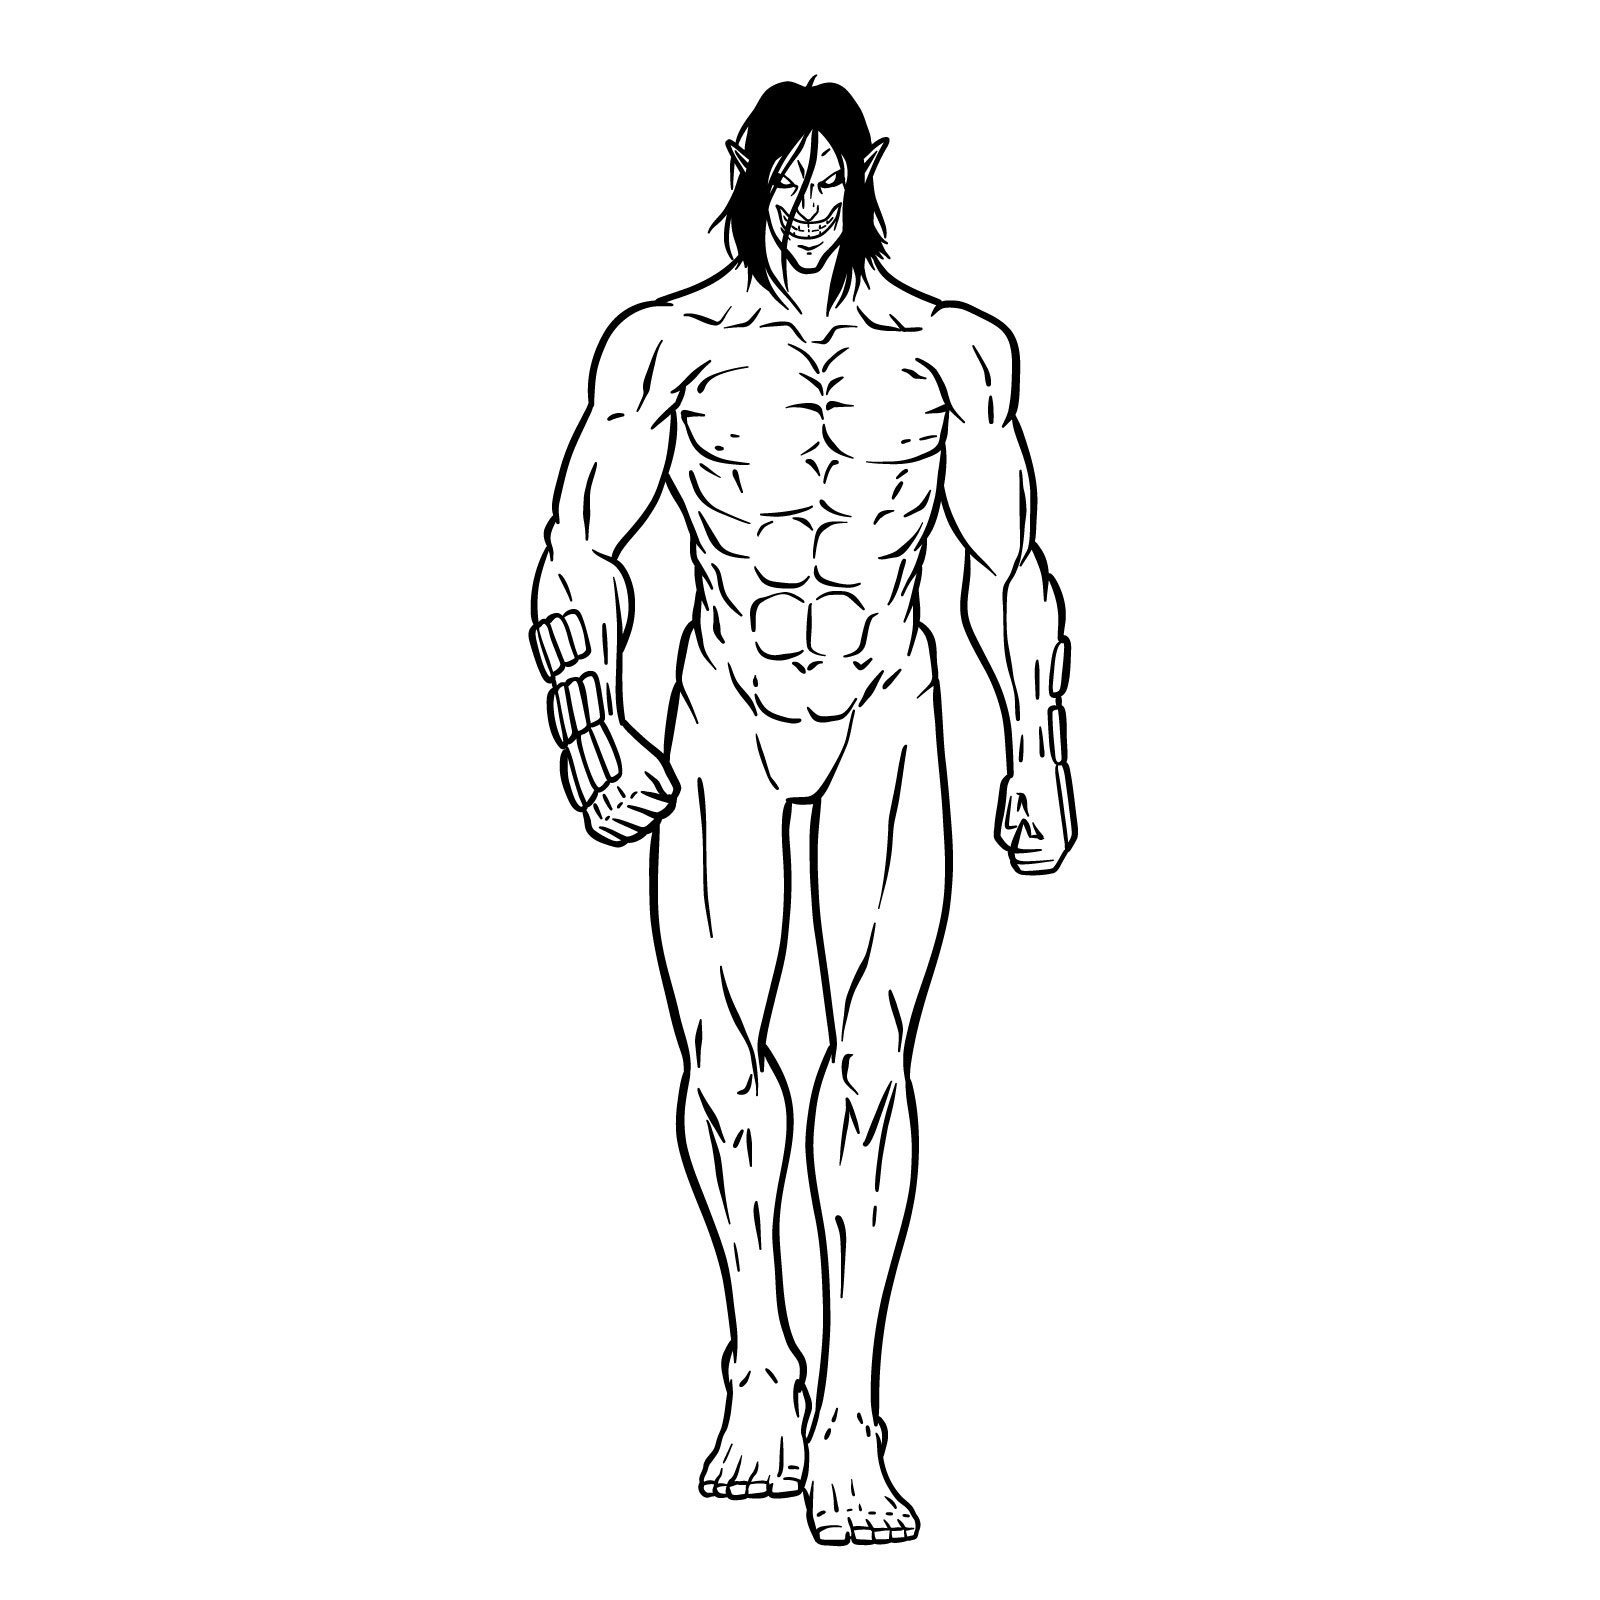 How to draw Eren Jaeger's Titan form full body - final step